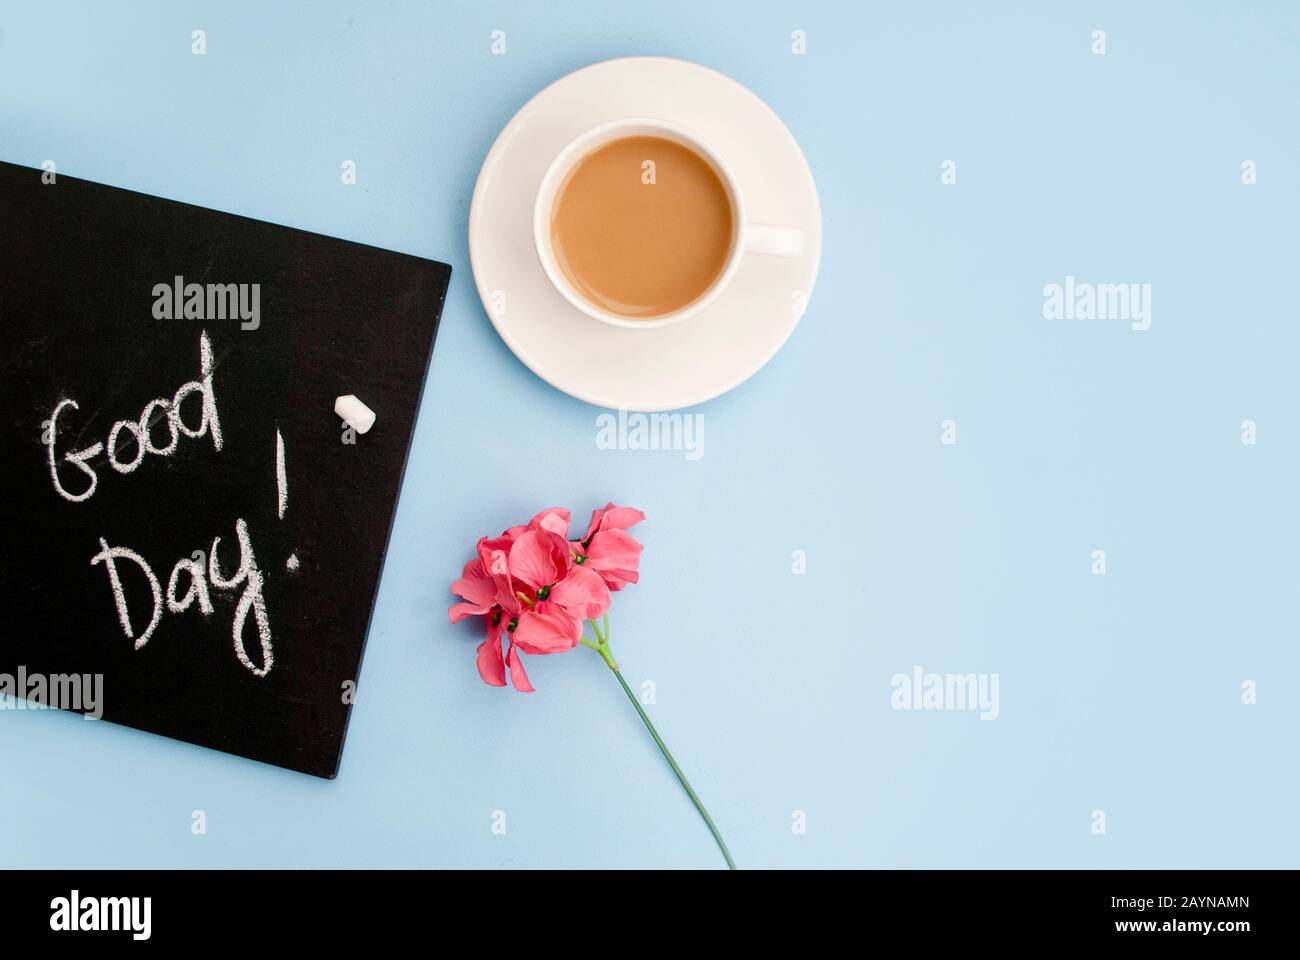 Good Morning Card High Resolution Stock Photography And Images Alamy